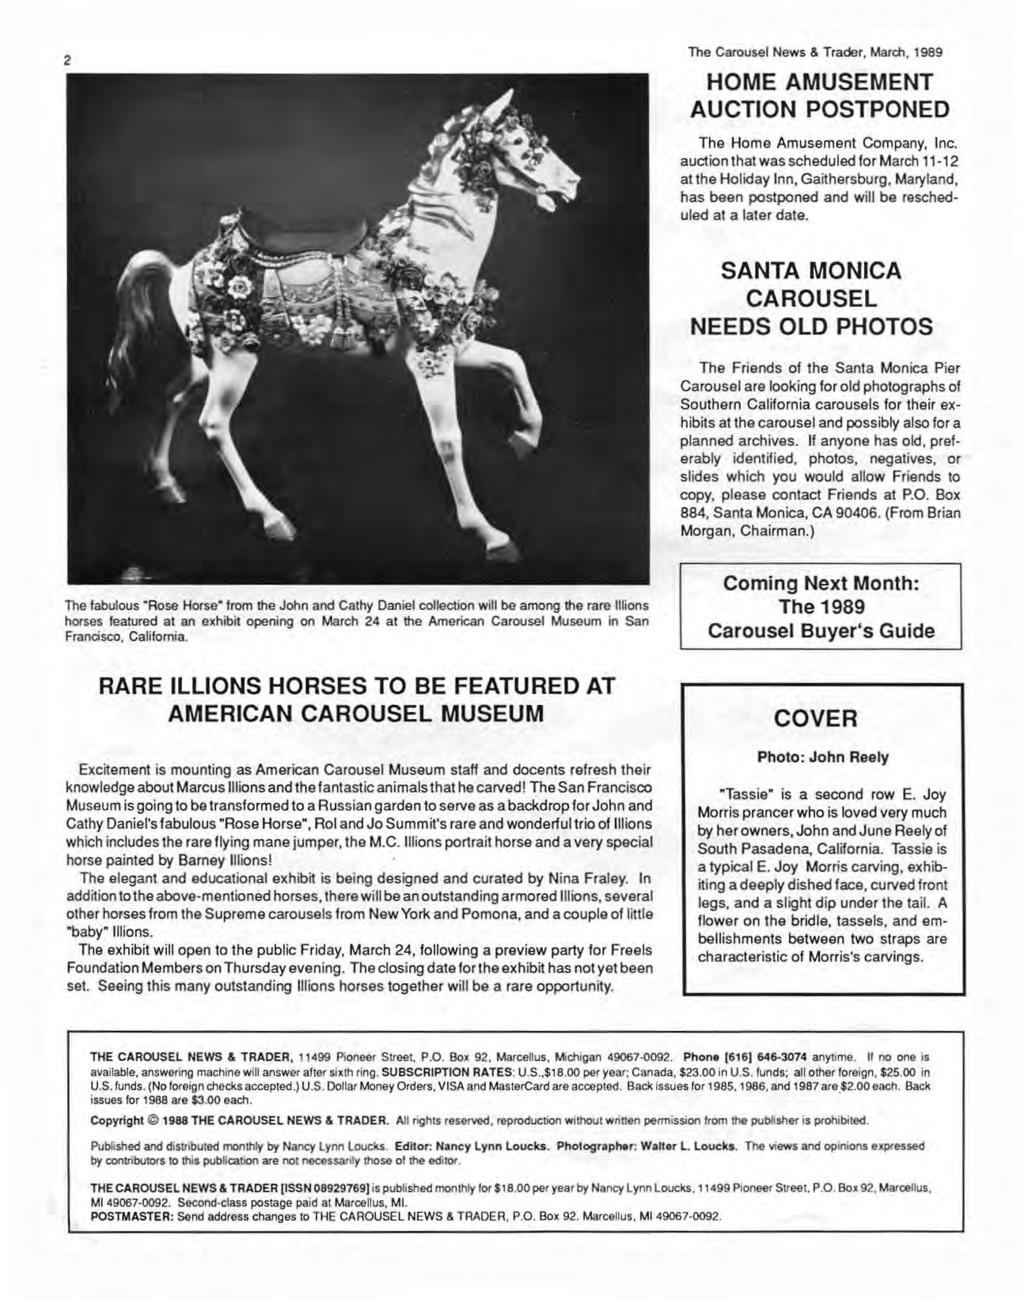 2 The Carousel News & Trader, March, 1989 HOME AMUSEMENT AUCTION POSTPONED The Home Amusement Company, Inc.